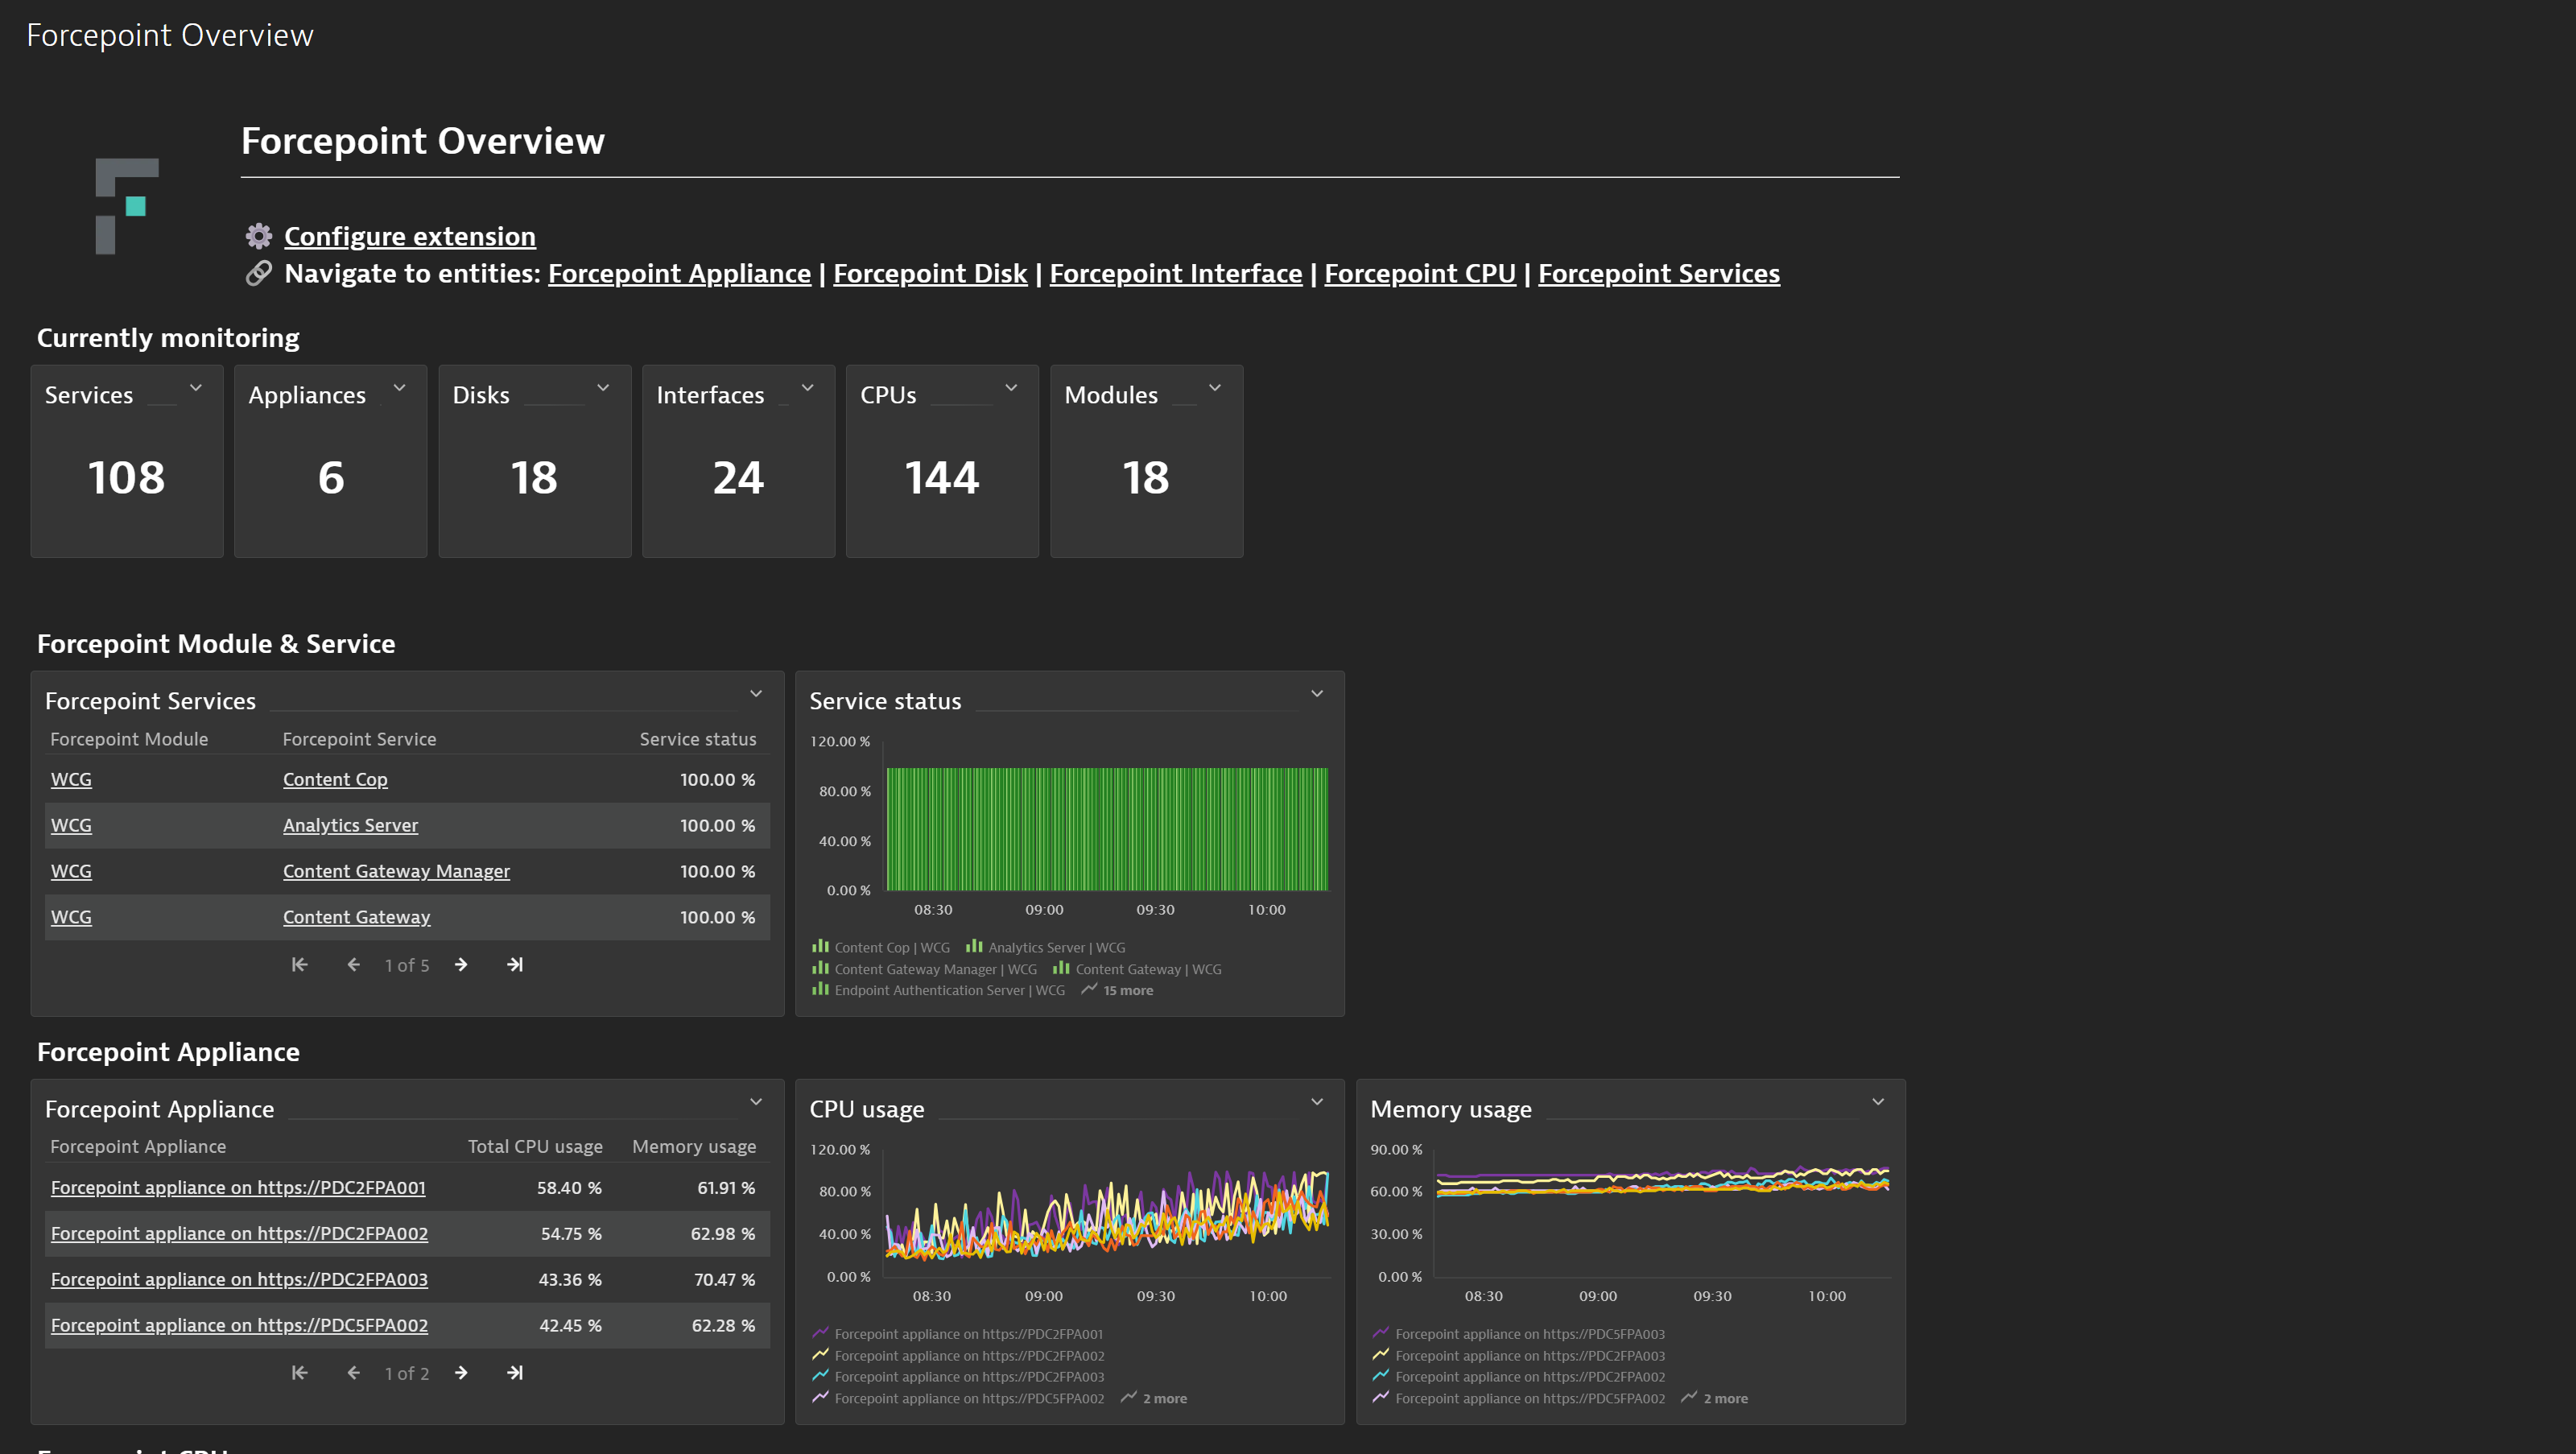 Get a quick overview of your forcepoint monitoring status with the included overview dashboard